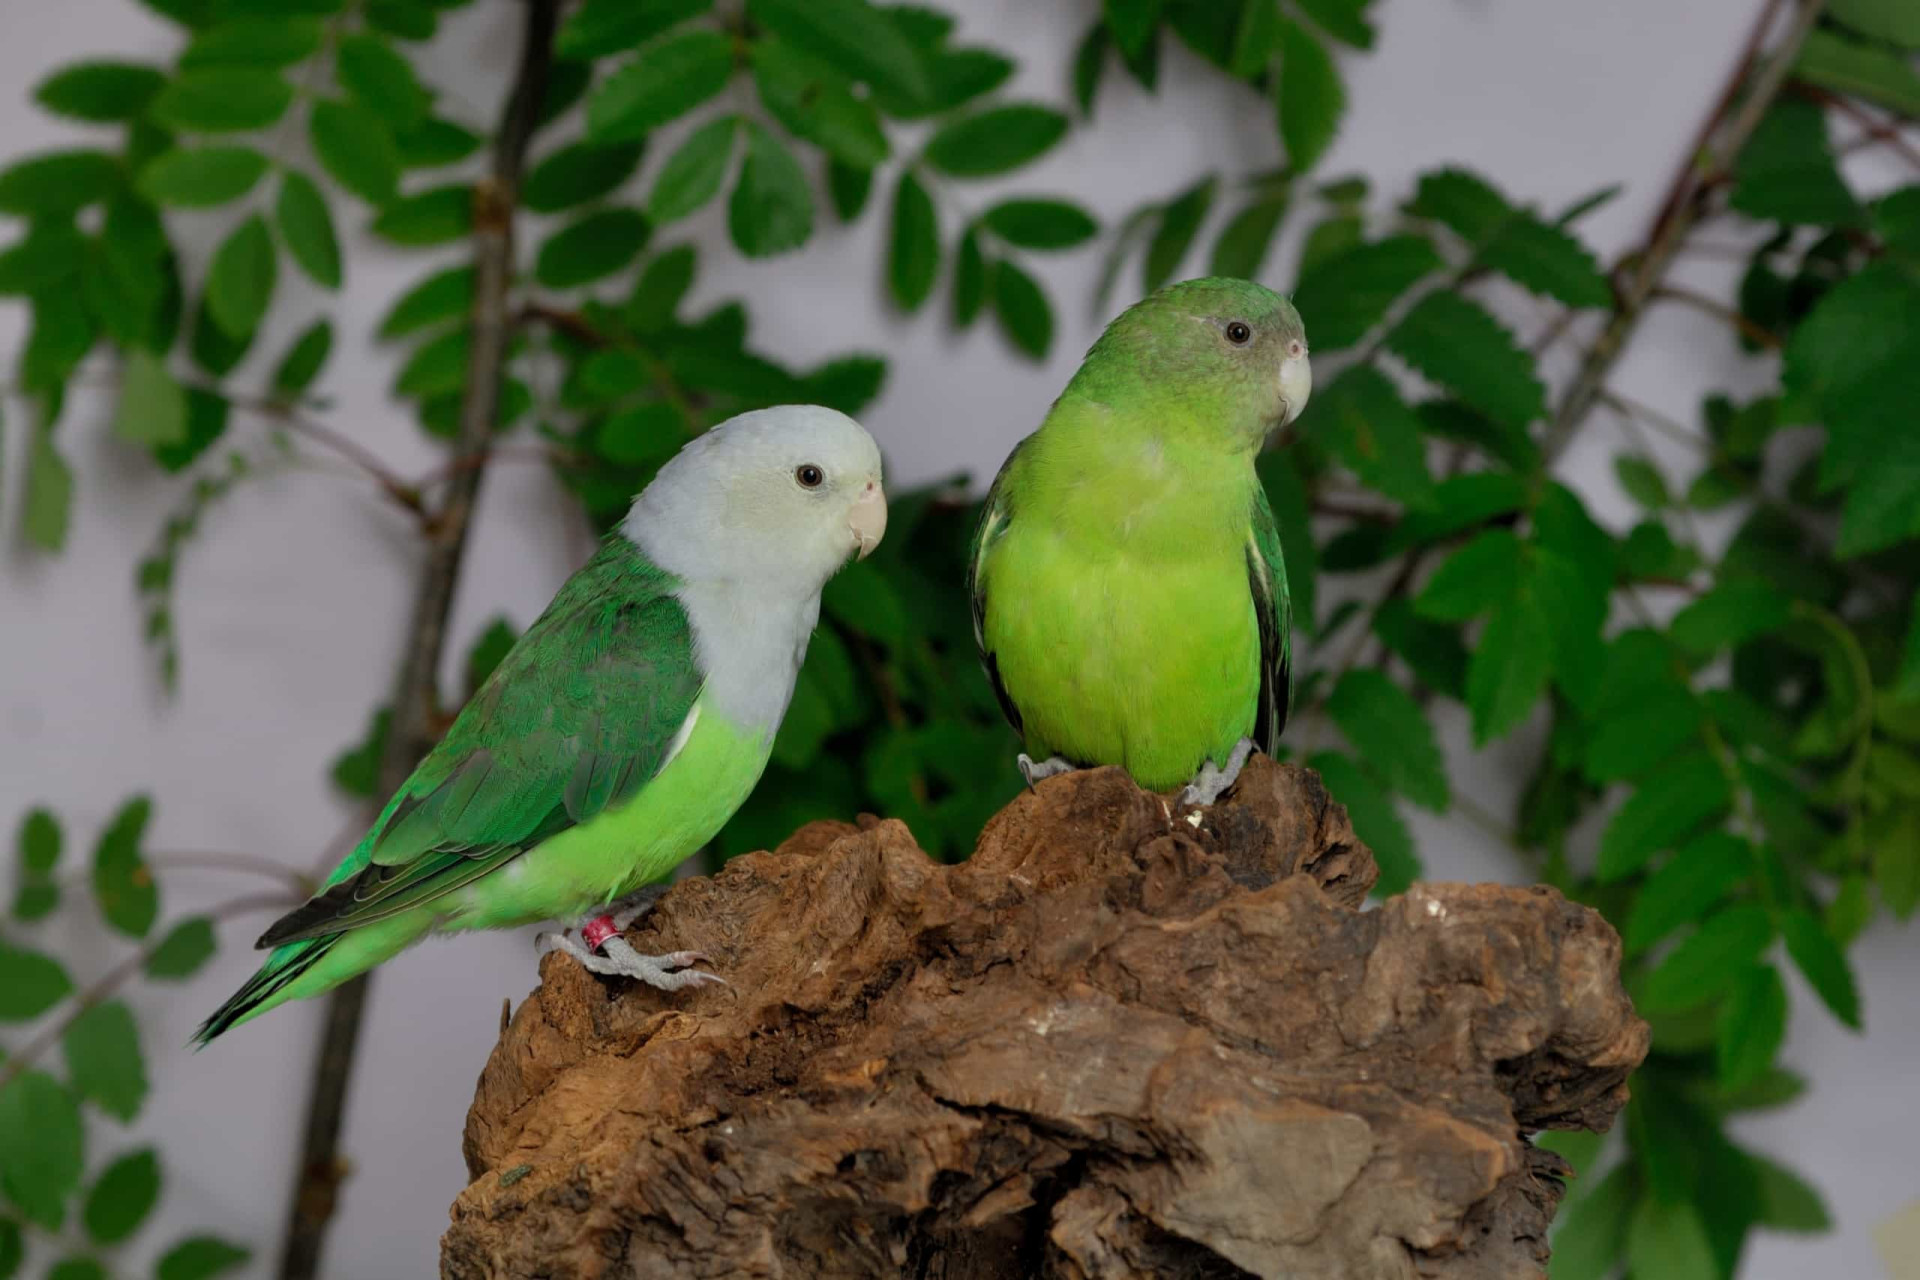 <p>The adult female (right) is entirely green while the adult male is distinguished by its pale grey head and upper body.</p><p><a href="https://www.msn.com/en-us/community/channel/vid-7xx8mnucu55yw63we9va2gwr7uihbxwc68fxqp25x6tg4ftibpra?cvid=94631541bc0f4f89bfd59158d696ad7e">Follow us and access great exclusive content every day</a></p>